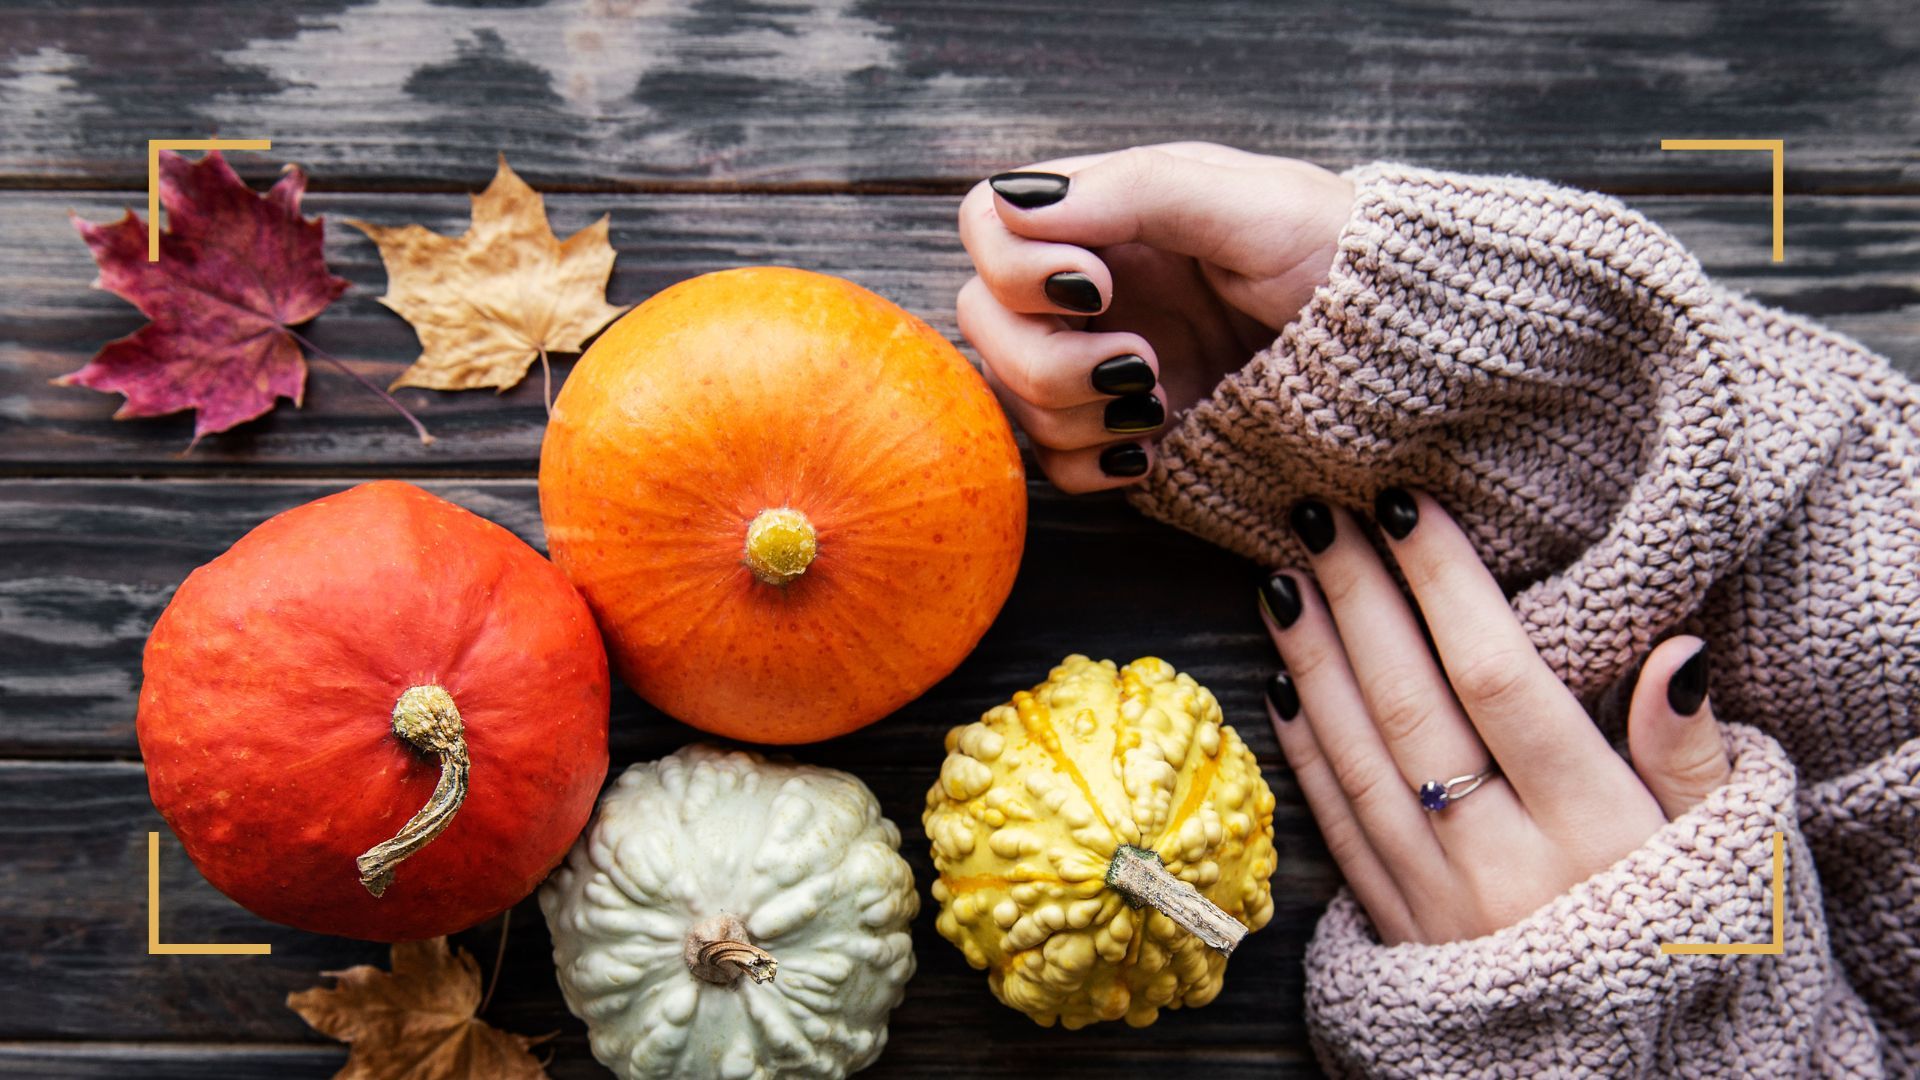 9. "Essential Fall Nail Colors for a Flawless Manicure" - wide 7